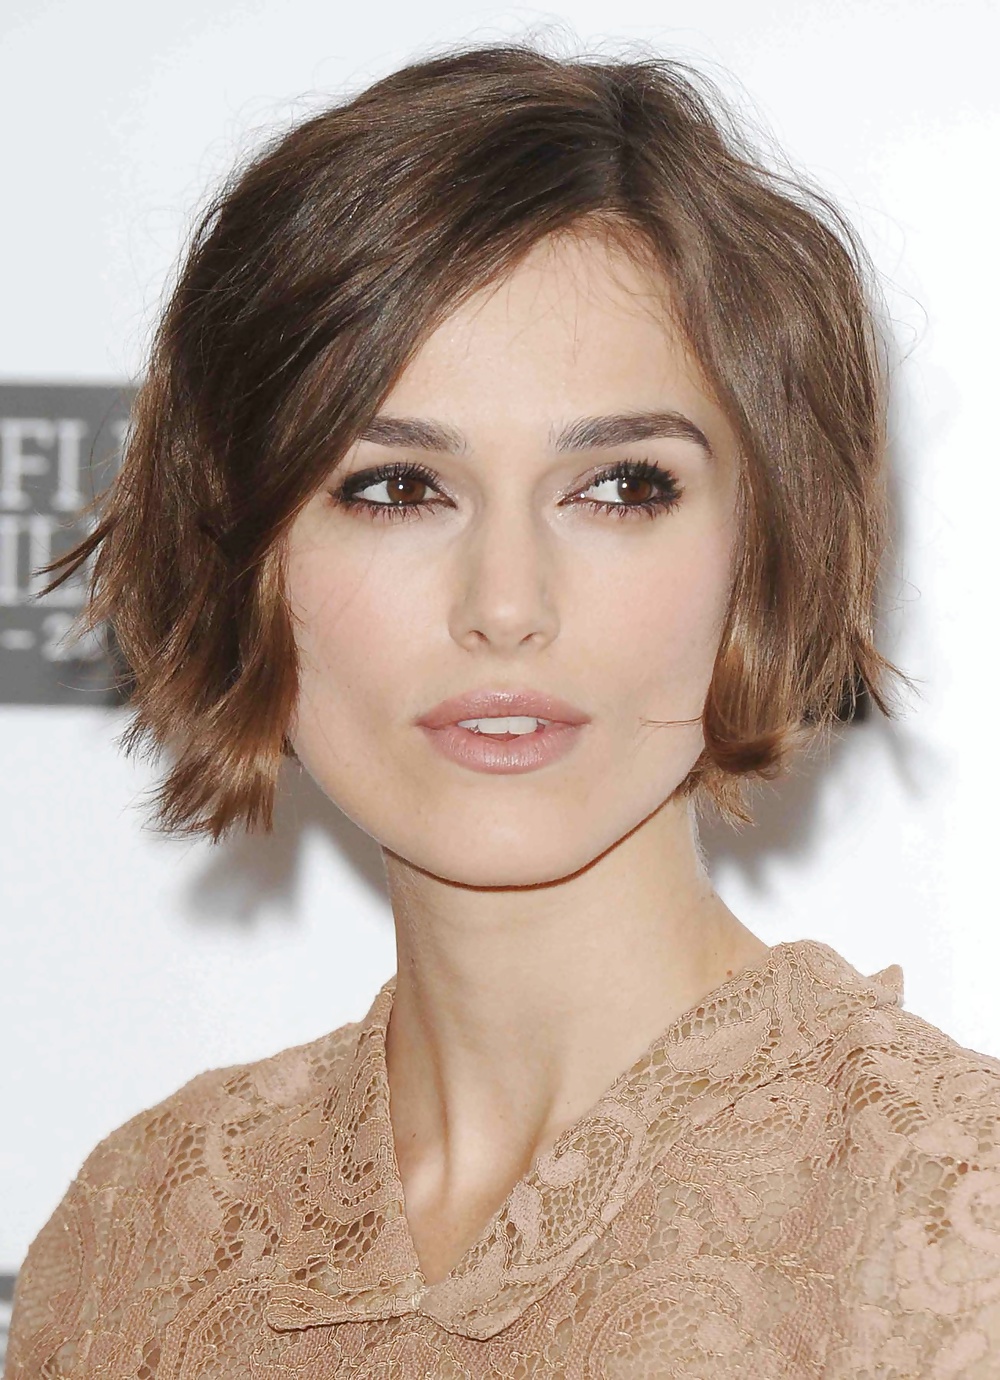 Keira Knightley The Royal Lady of England #35649517